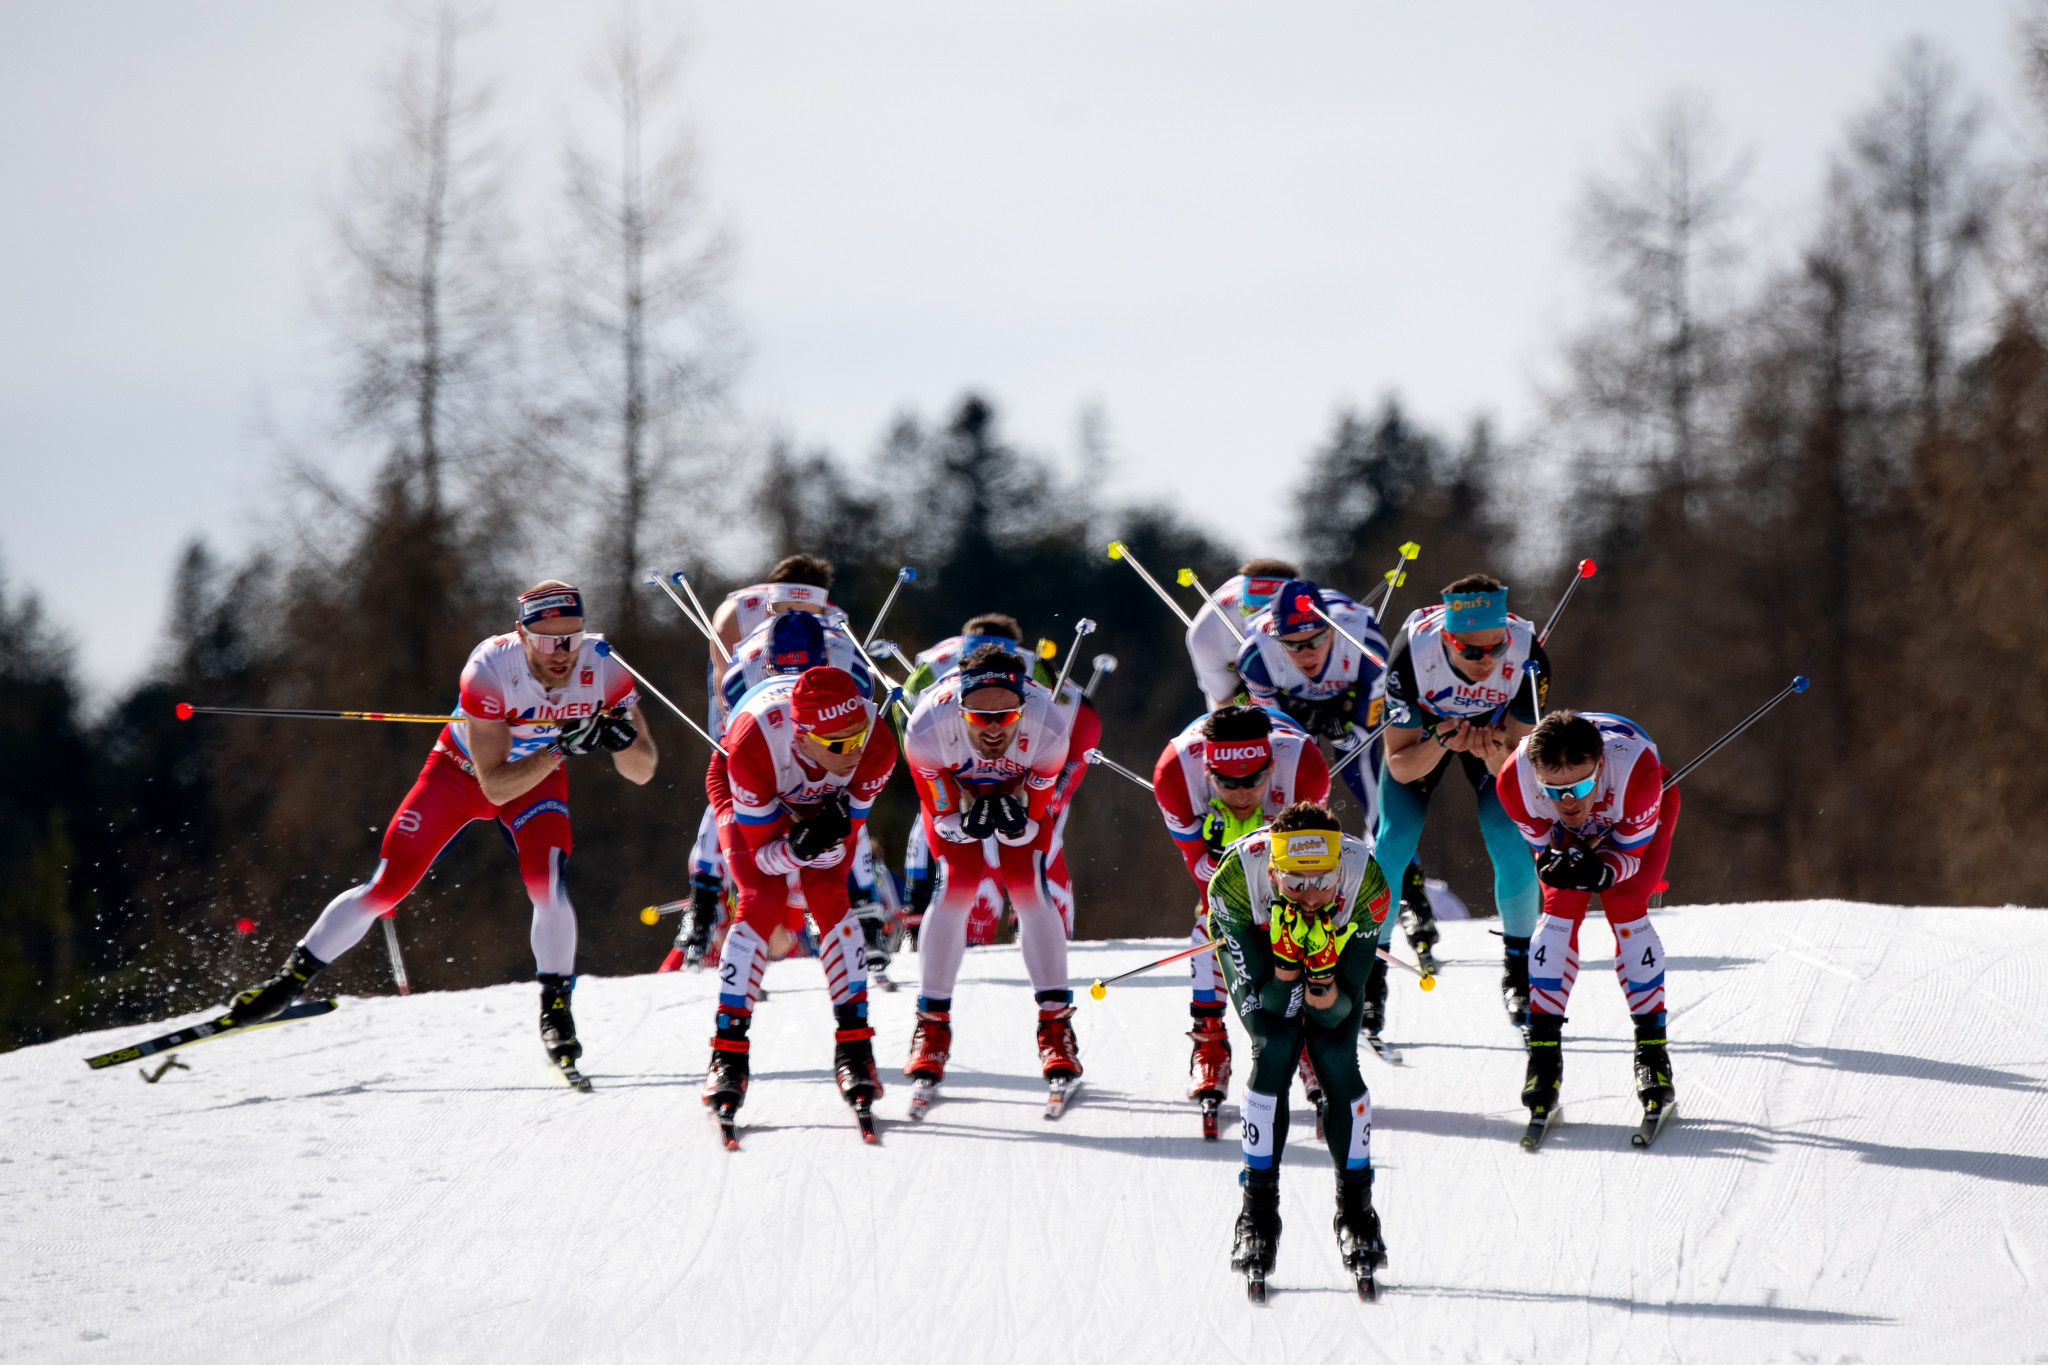 Seefeld in Austria hosted this year's edition of the FIS Nordic World Ski Championships ©Getty Images